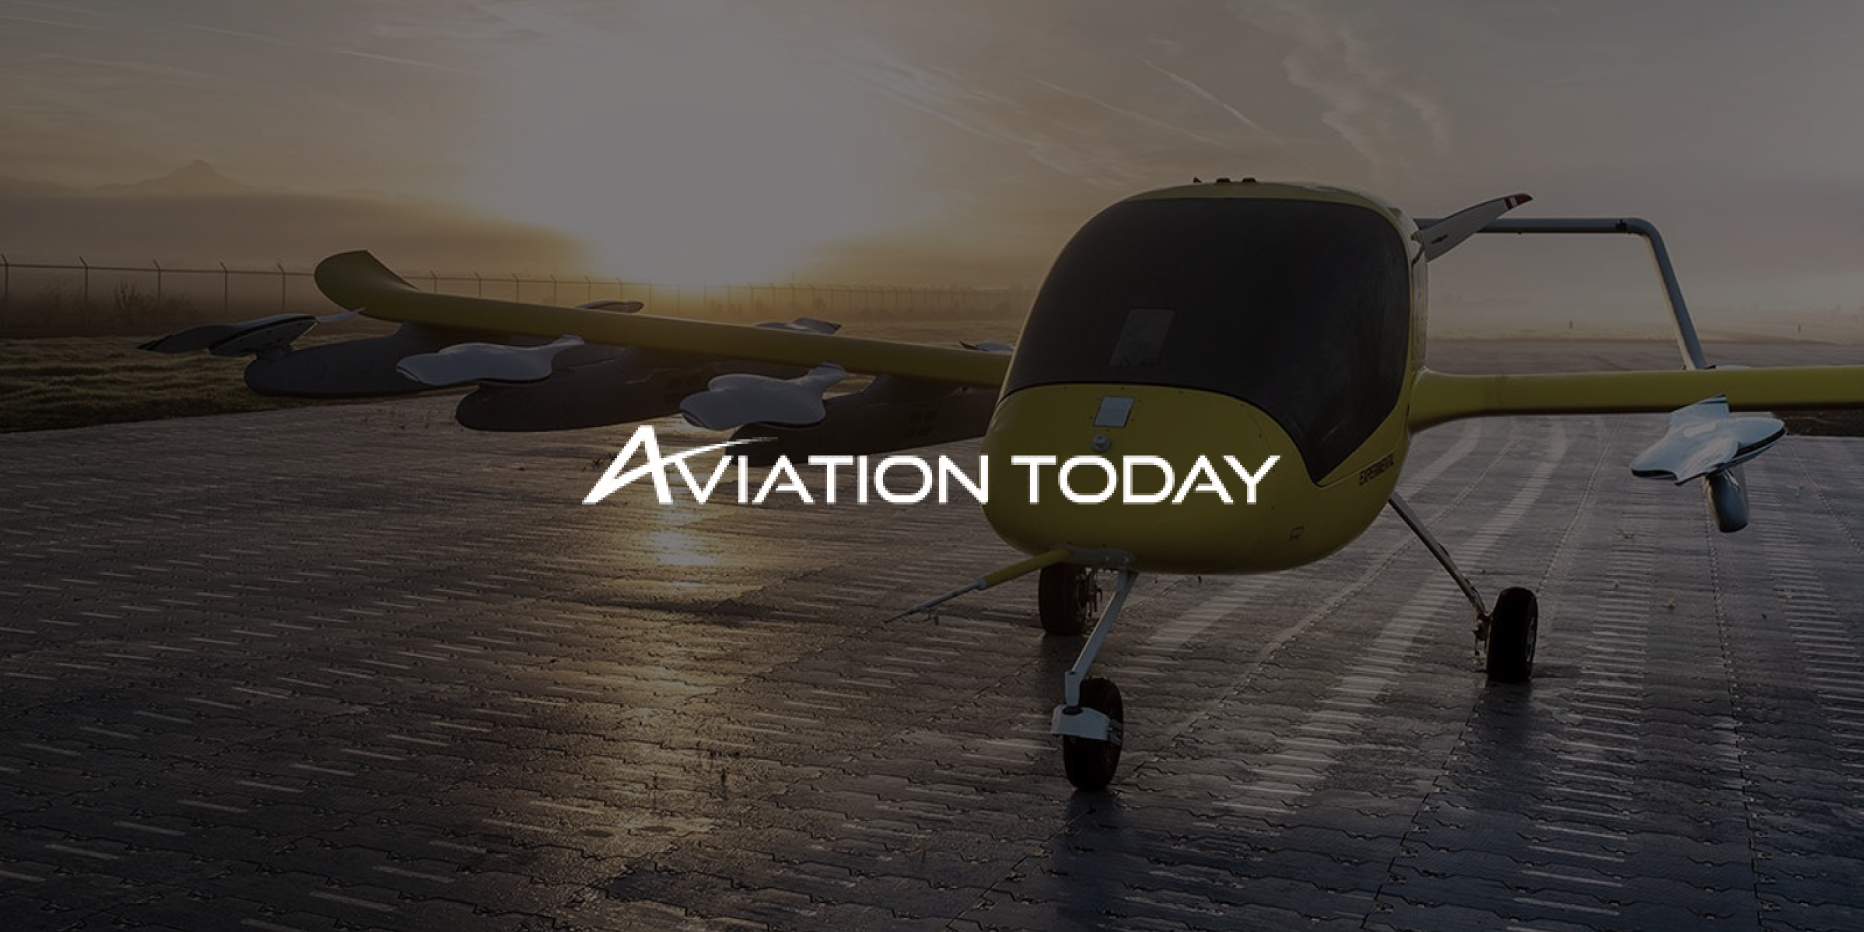 Air Taxi Companies Ramp Up Infrastructure Plans as Aircraft Certification Looms